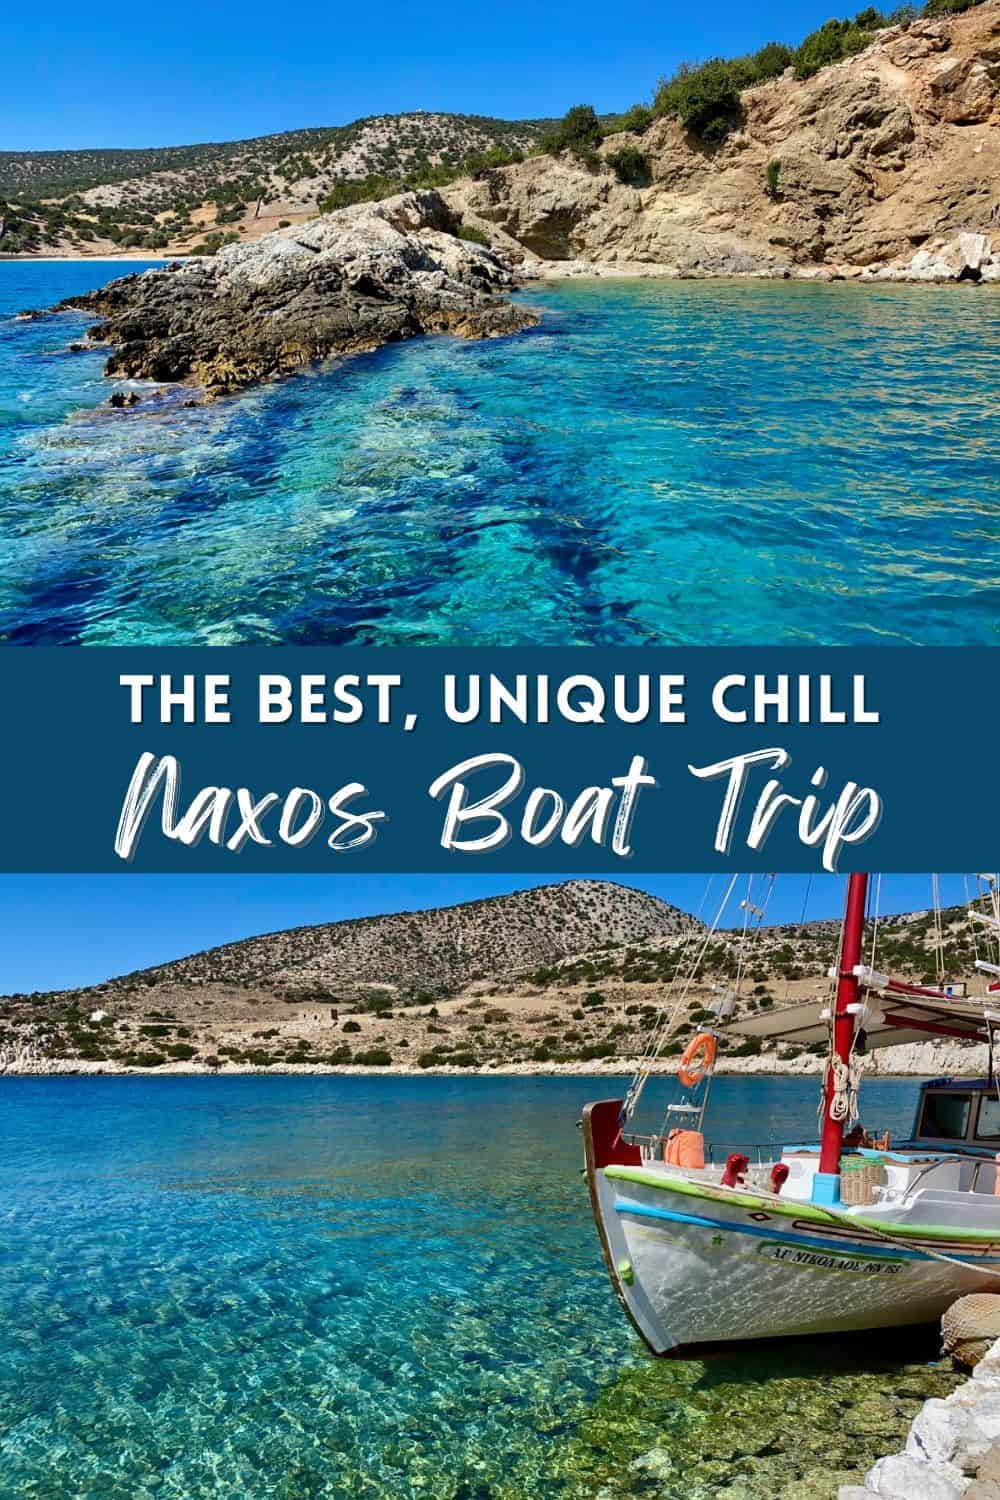 The Best Naxos Boat Trip | Doing a Naxos boat tour is popular, a perfect way to experience the gorgeous turquoise waters around the island. Why this small, more remote Naxos sailing tour with Yiannis is the best boat tour on Naxos, super local, best way of visiting Rina Cave. What to do in Naxos Greece, Naxos itinerary ideas, Cyclades islands, Greek islands off the beaten path. #naxos #greece #greekislands #sailing